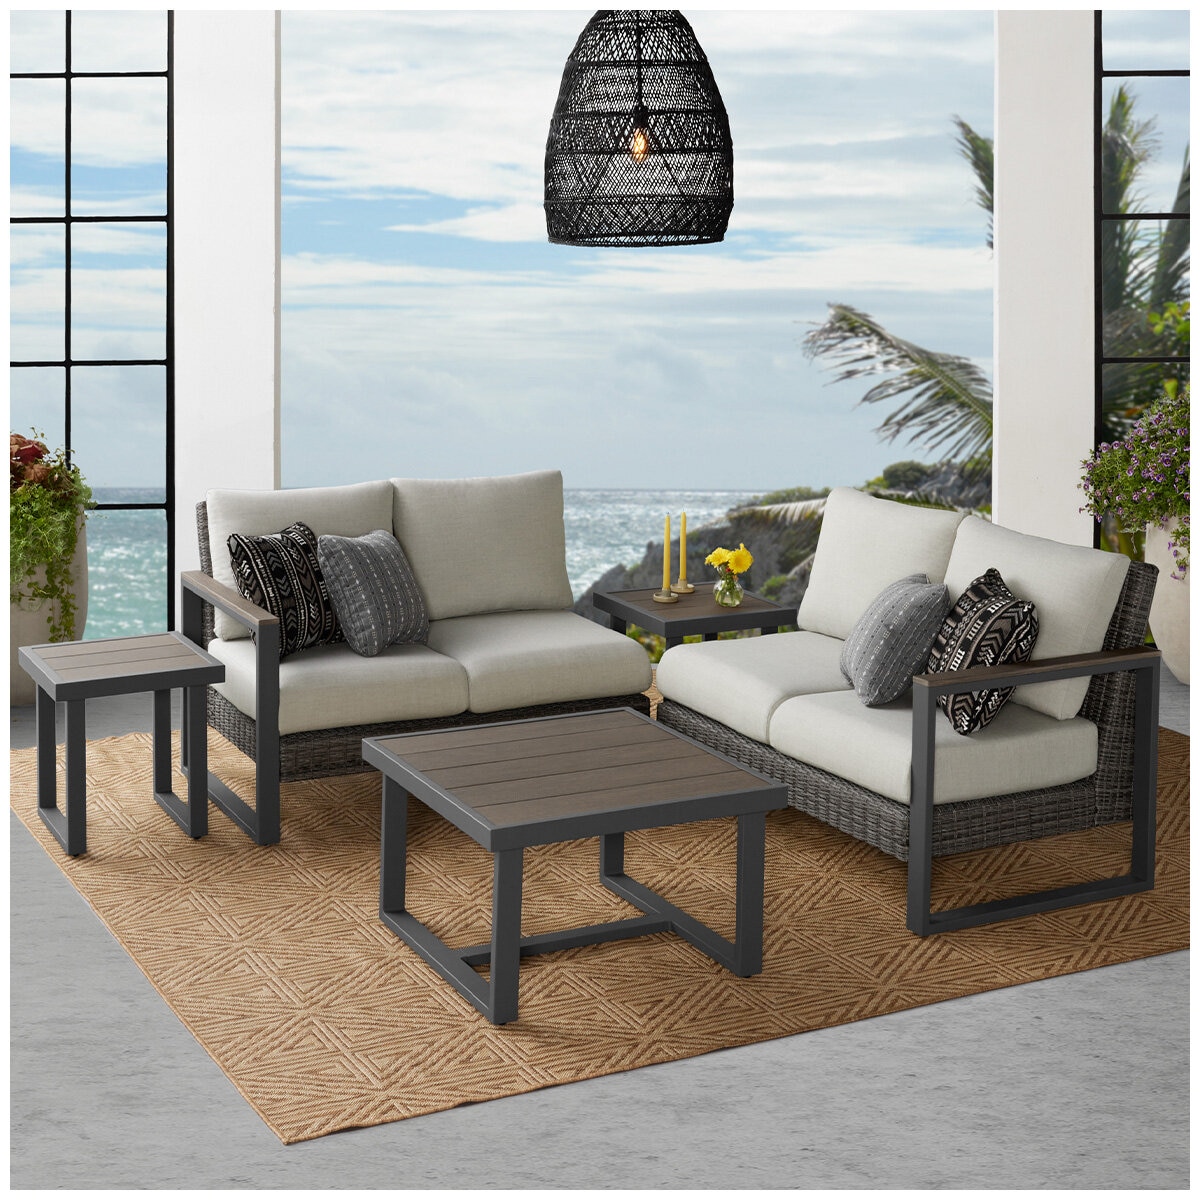 Agio Maricopa Woven Sectional Seating 5 Piece Set